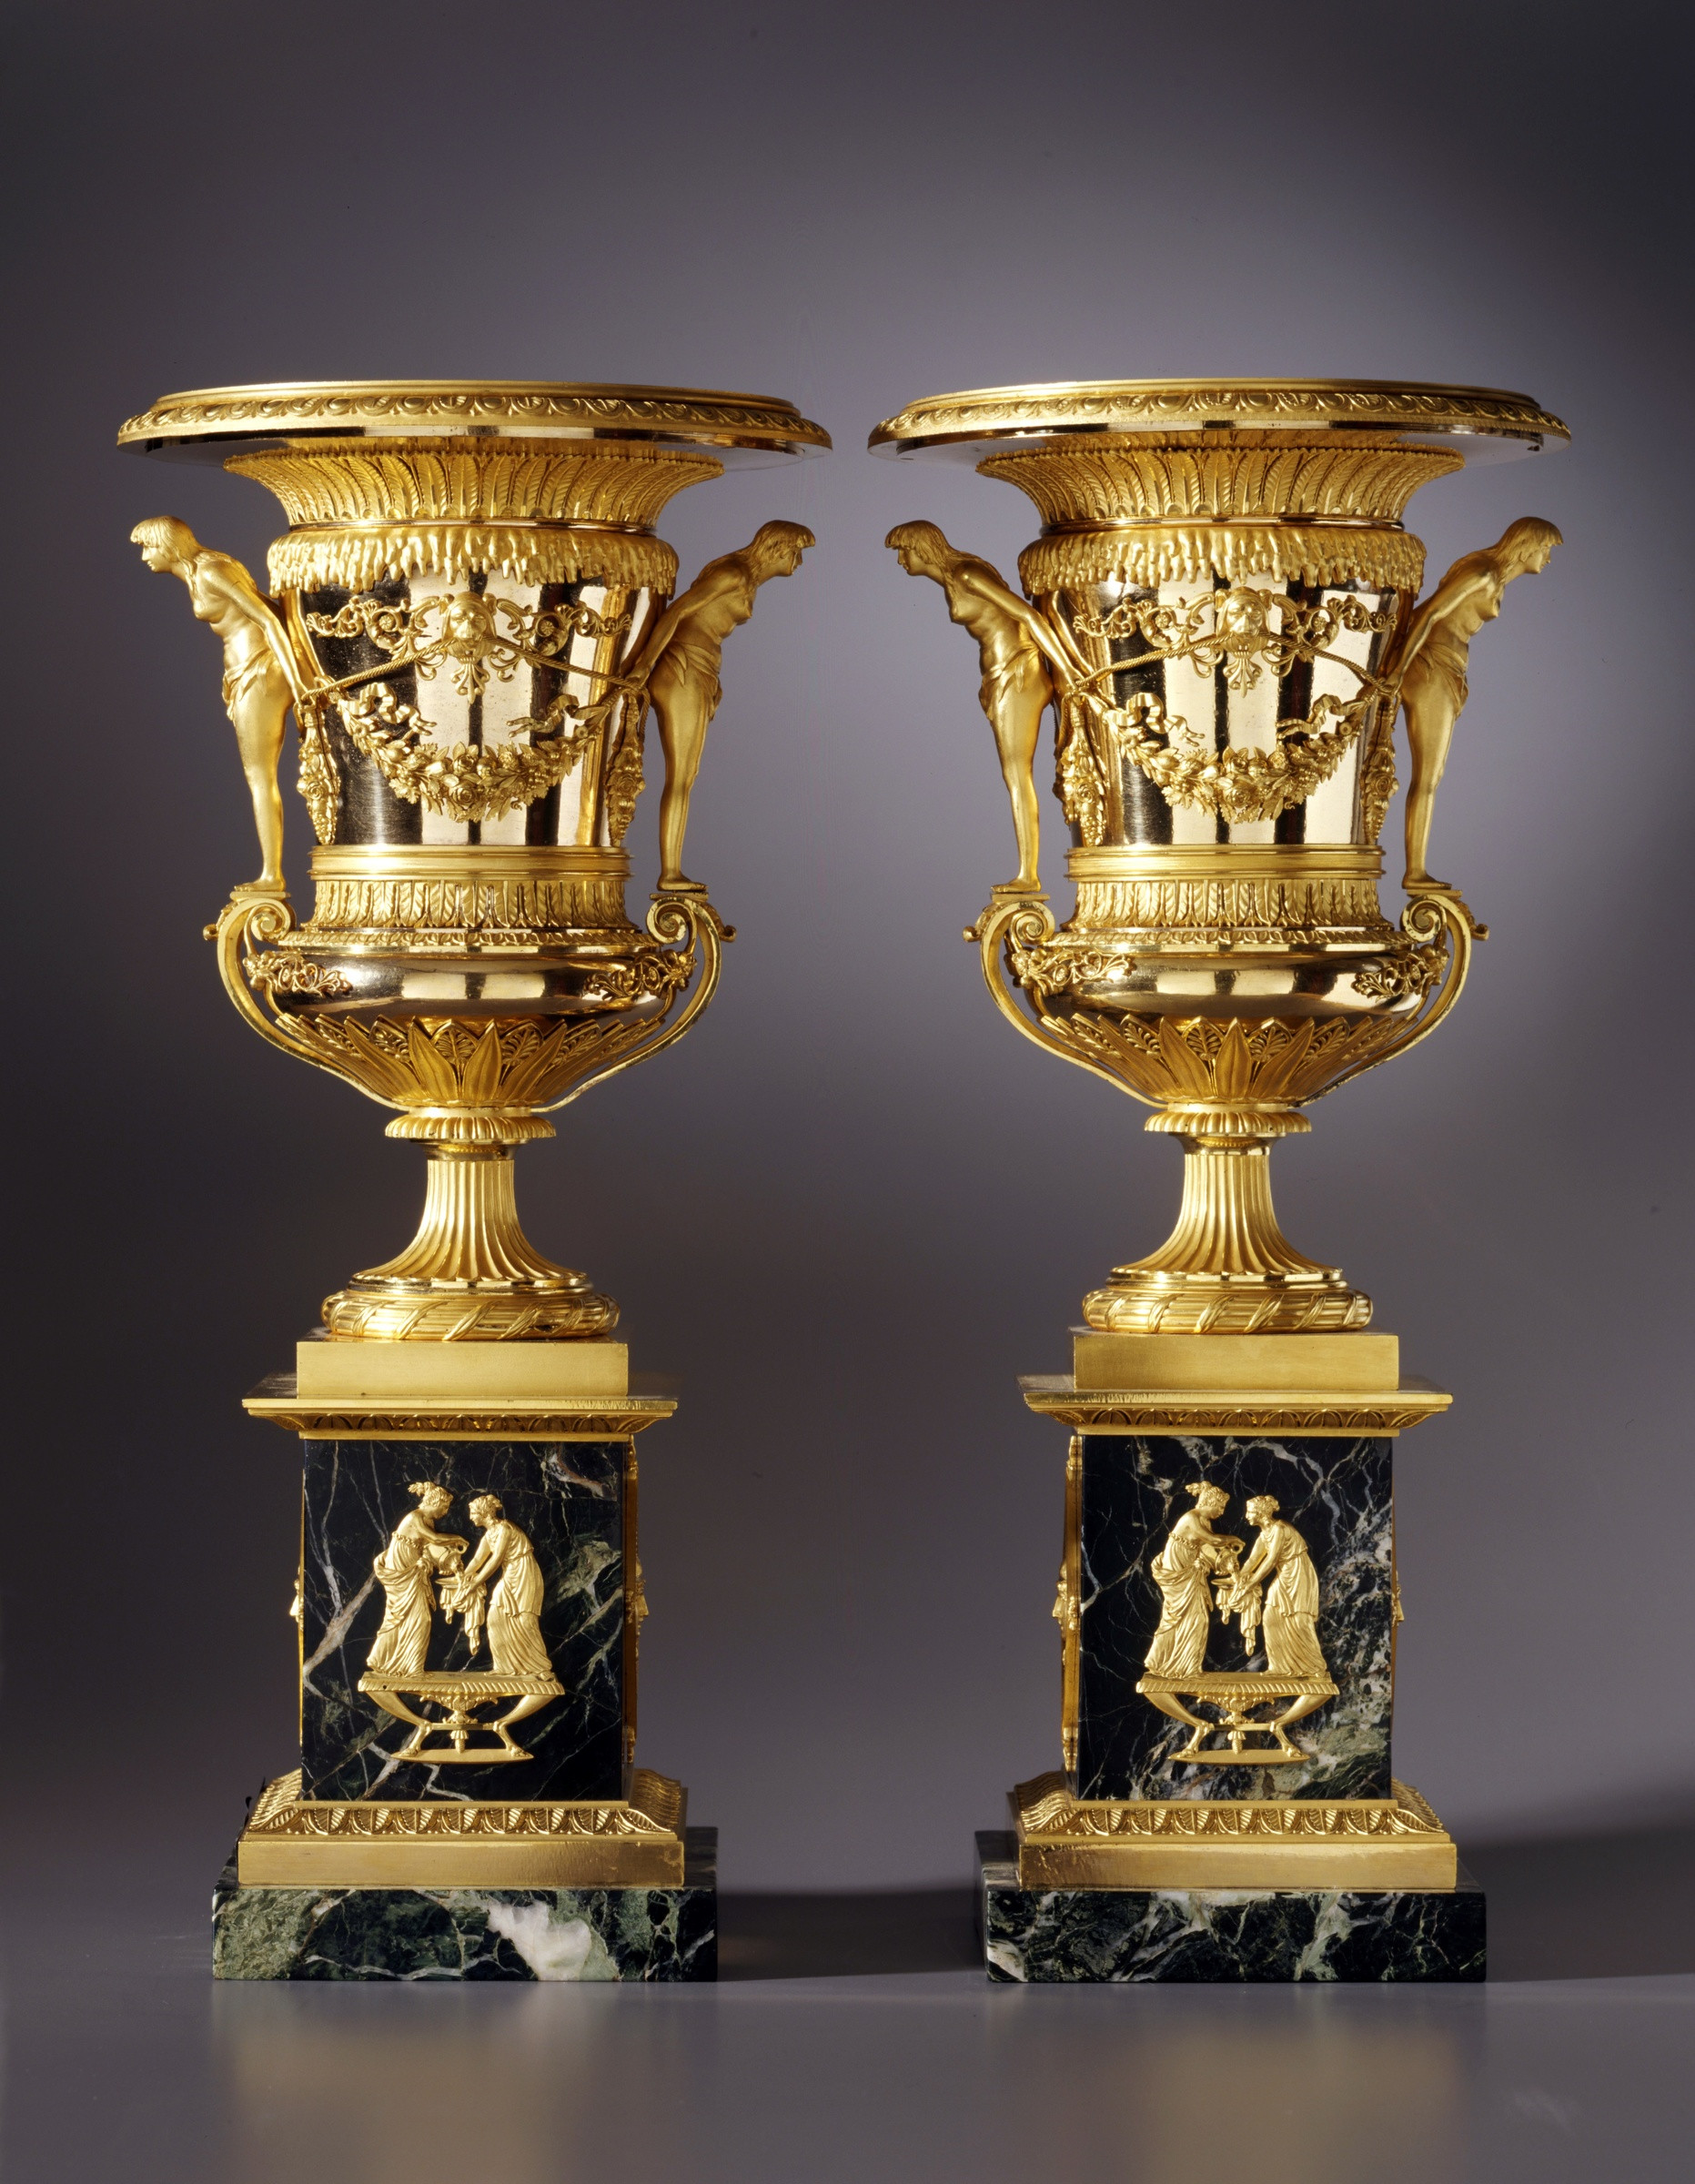 21 Cute Antique Vases for Sale 2024 free download antique vases for sale of friedrich bergenfeldt attributed to a pair of large sized st with a pair of large sized st petersburg empire vases attributed to friedrich bergenfeldt